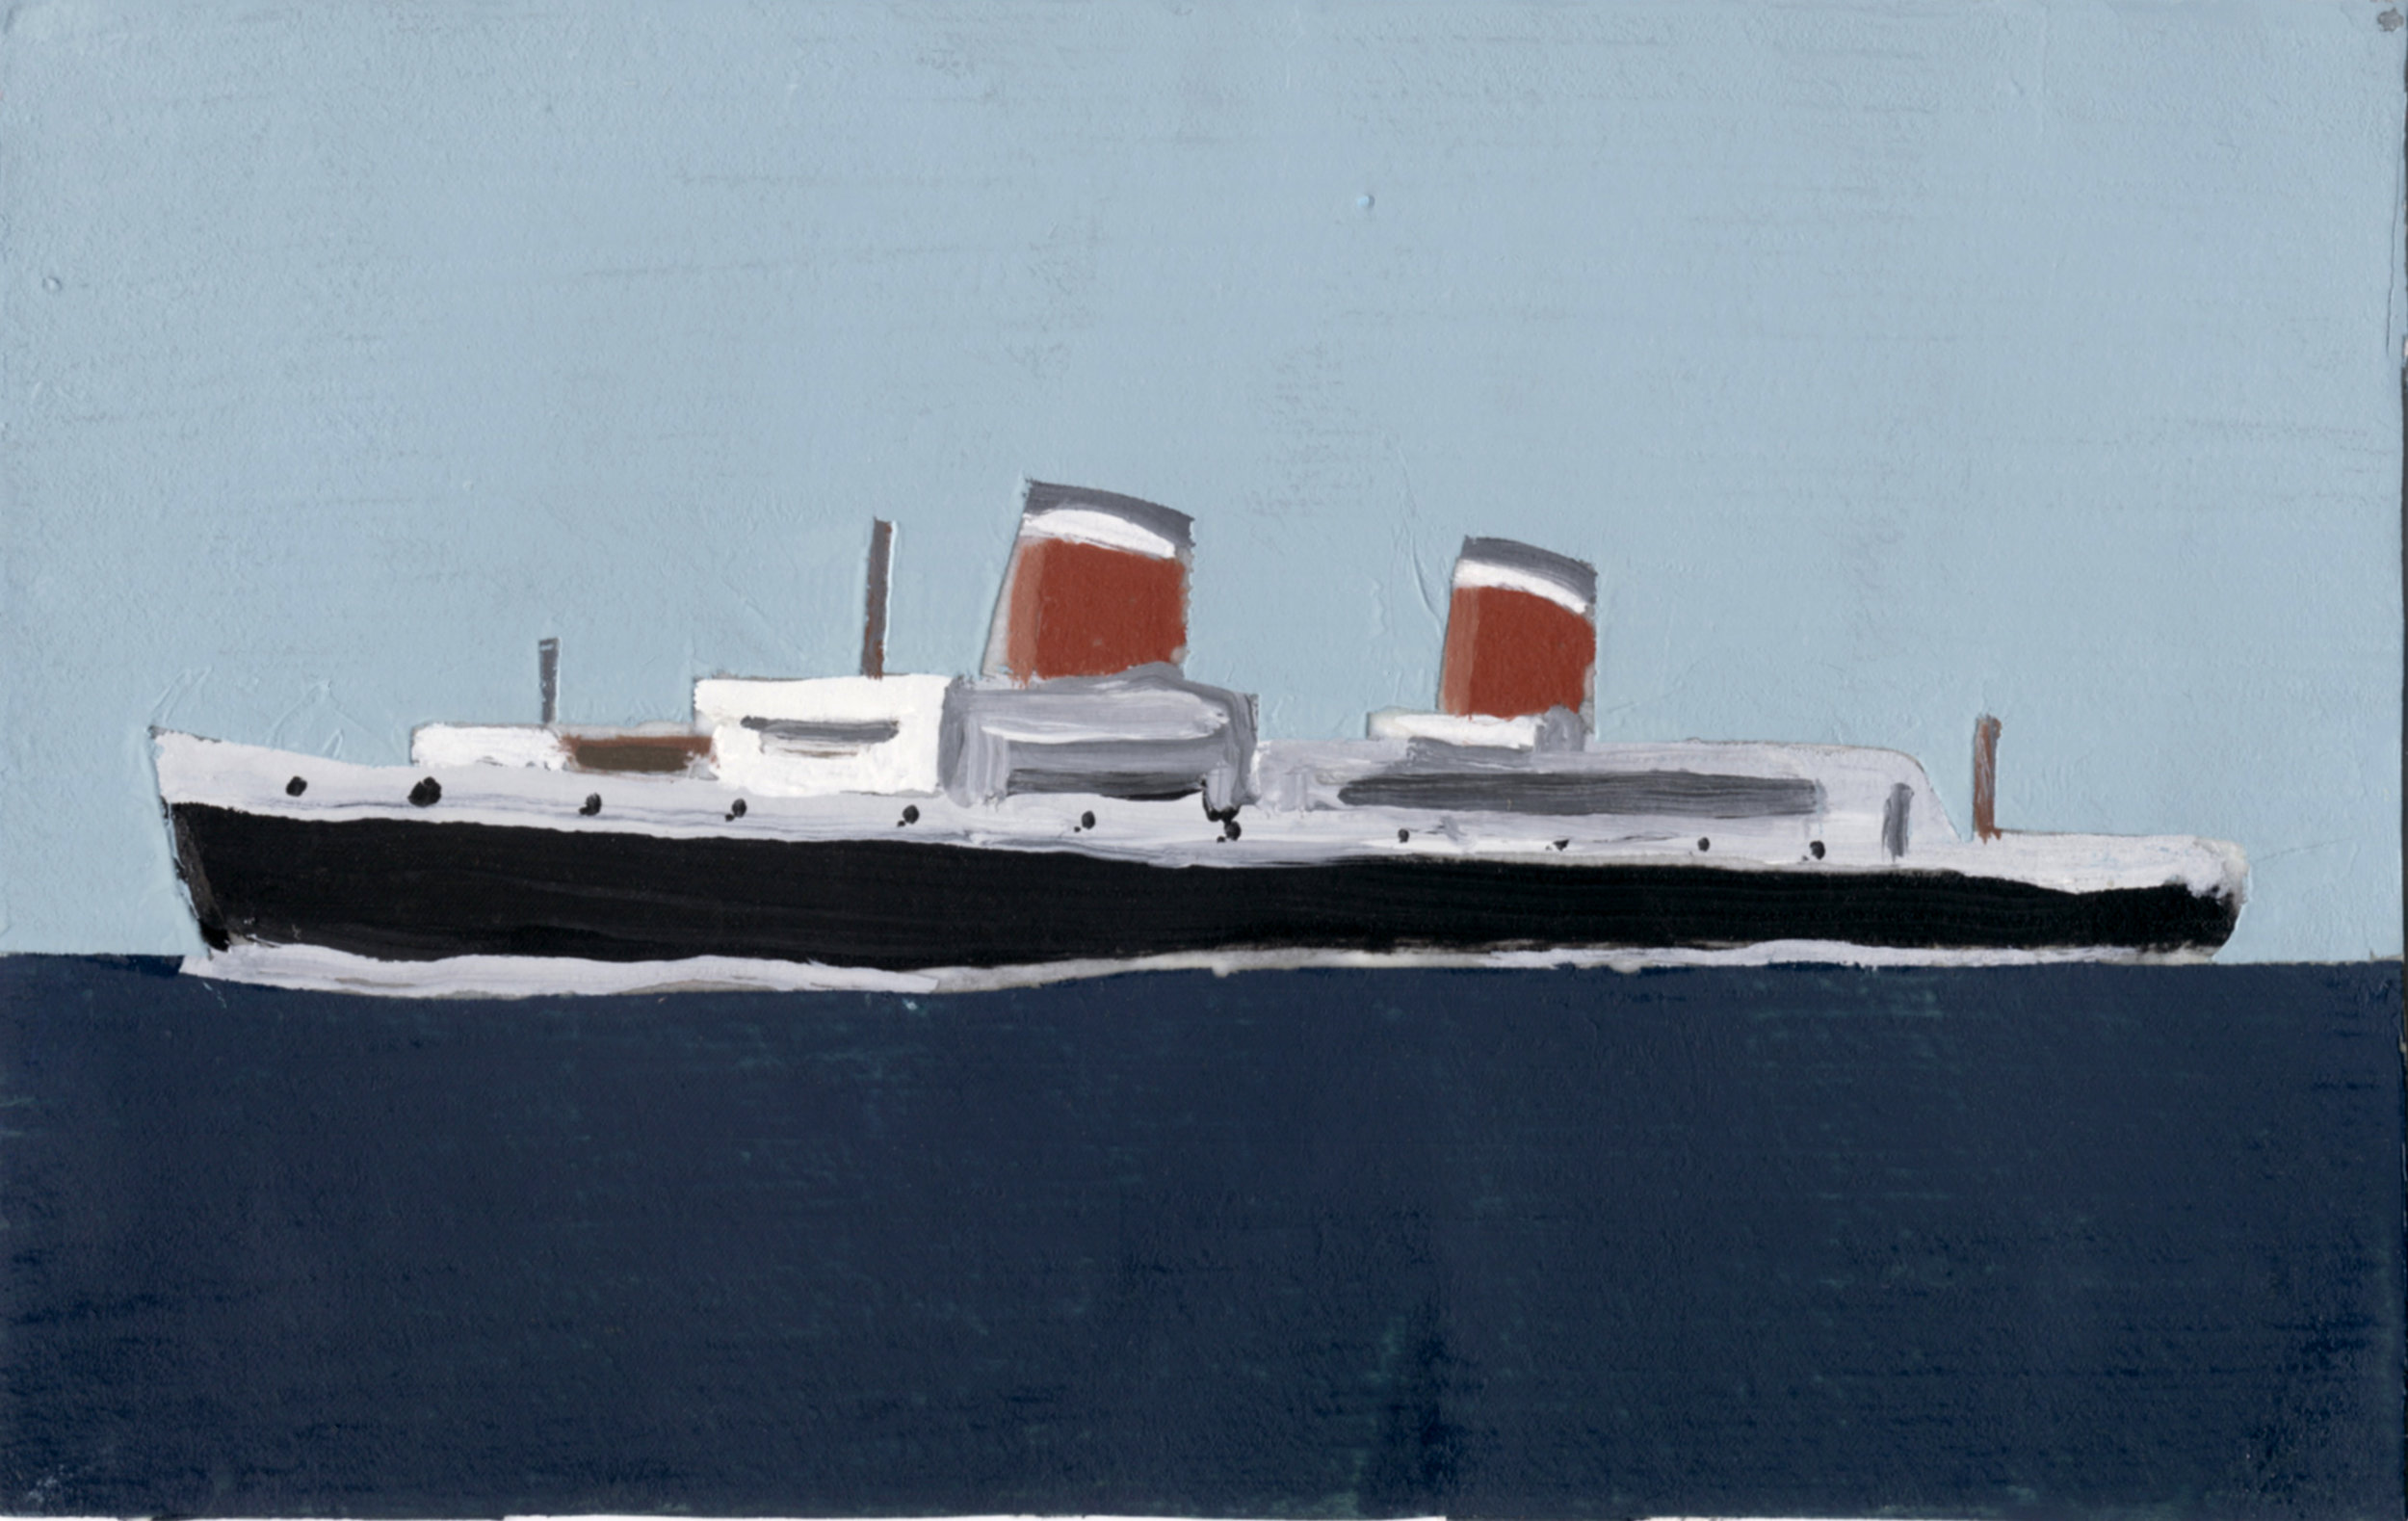   BILLET-DOUX: S.S. UNITED STATES    4.5”x6” | Clear acrylic gesso and oil on postcard | 2014    